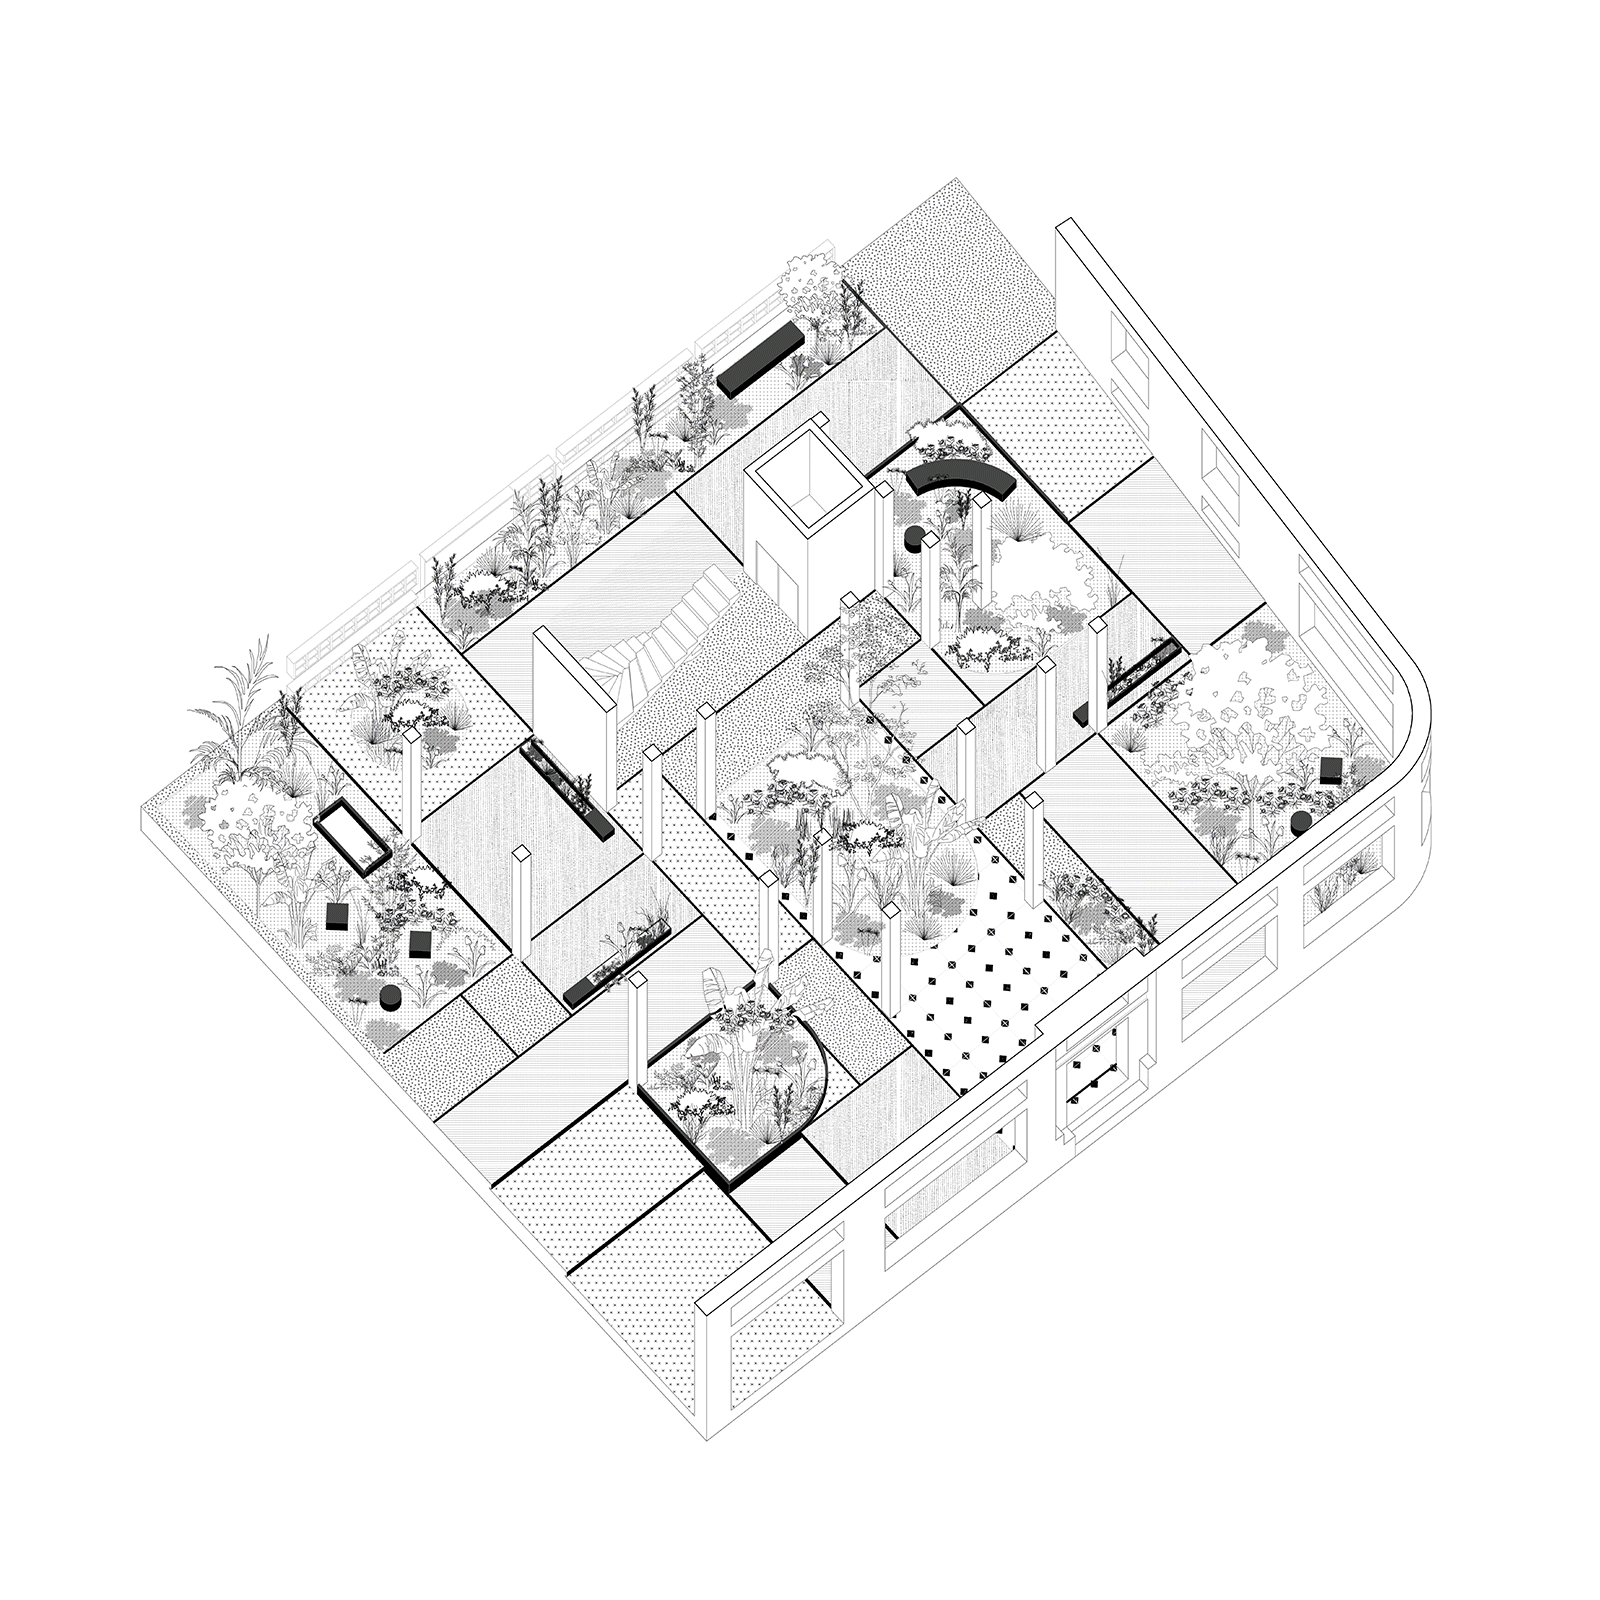 Archisearch Spartis, 25: The house between | Diploma project by Chara Agnanti & Meropi Konstantinidou